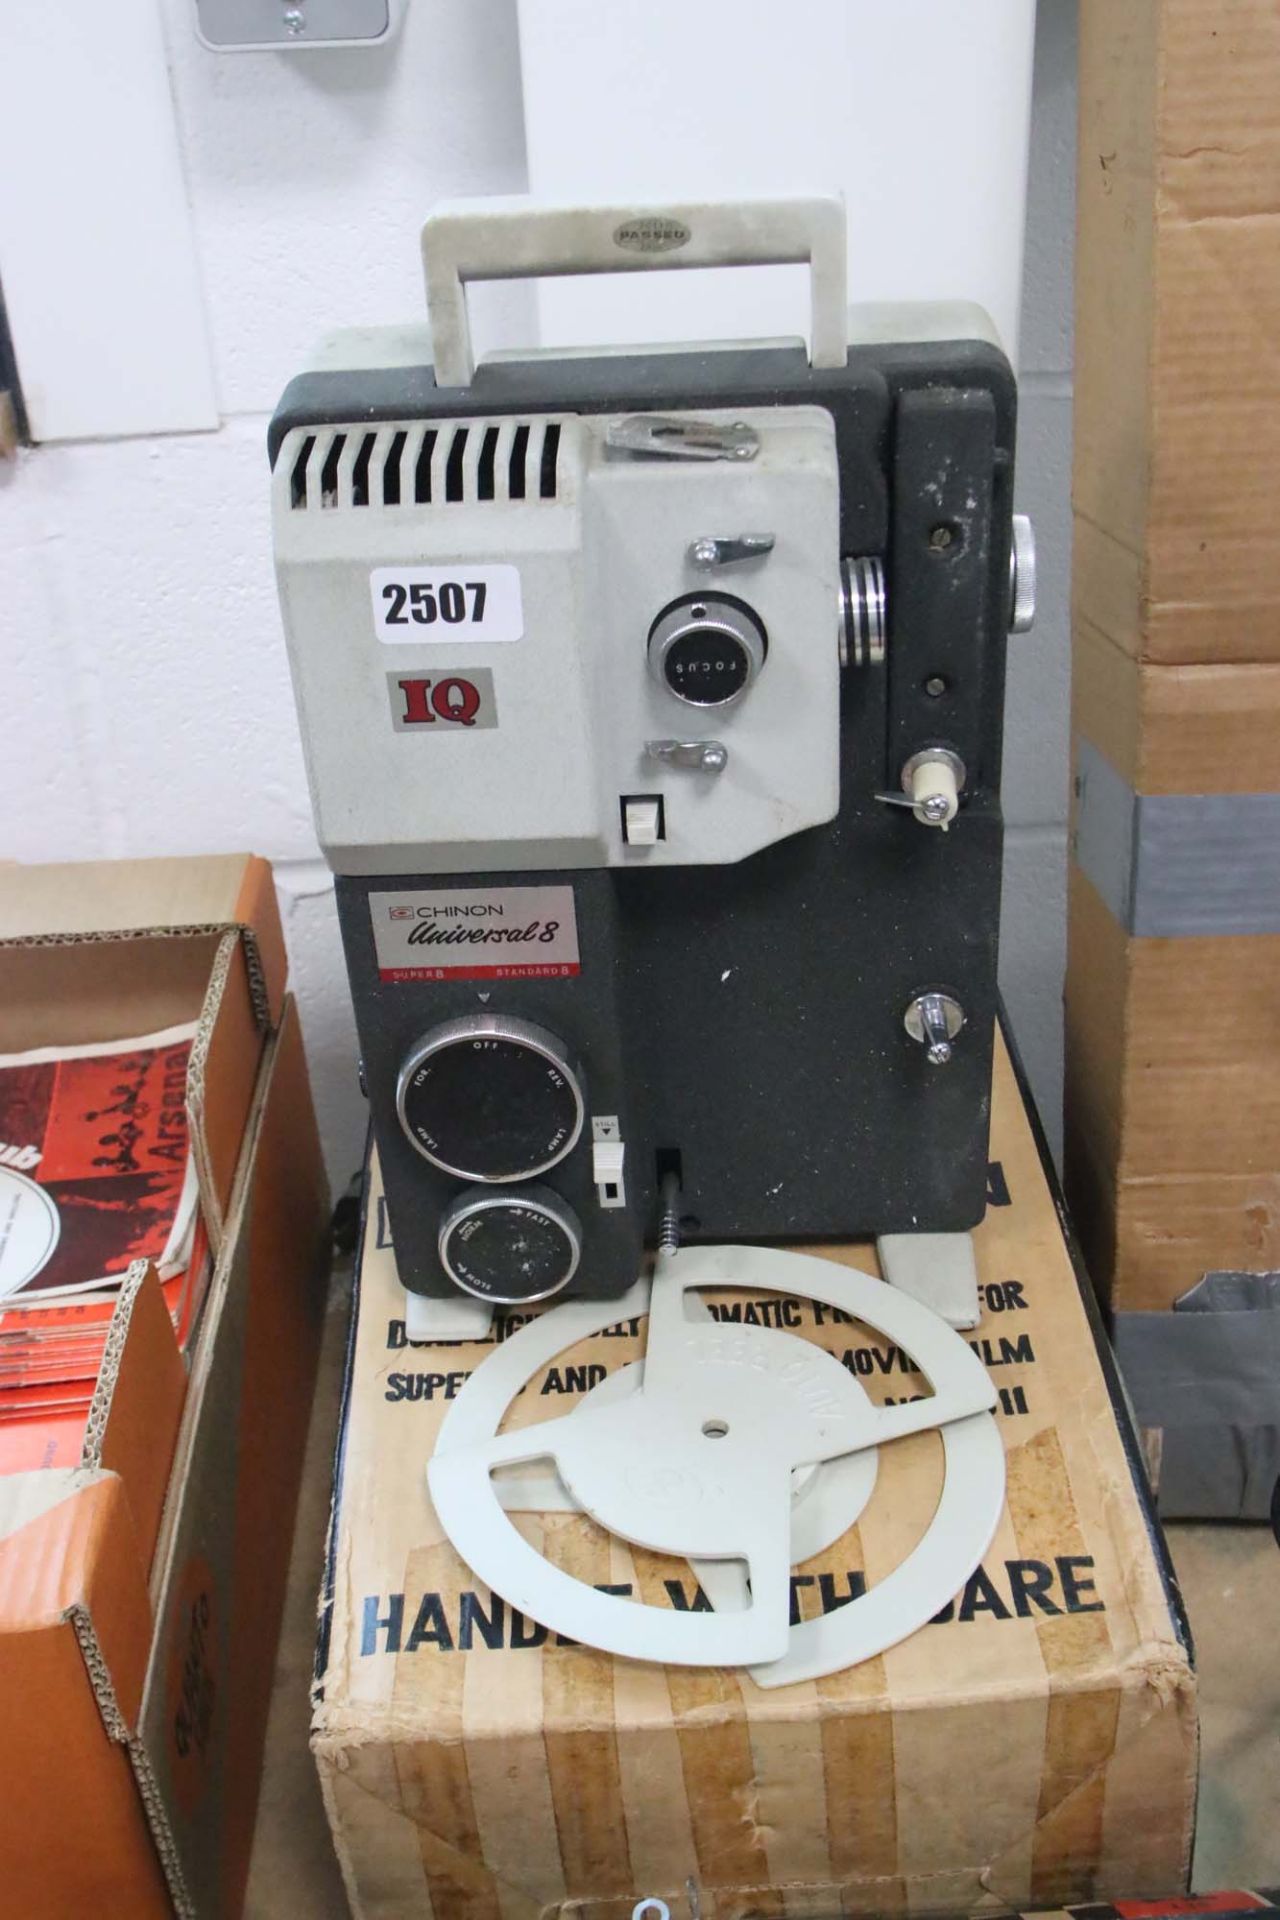 Chinon Universal 8 Super 8 and standard 8 cinereel projector with screen